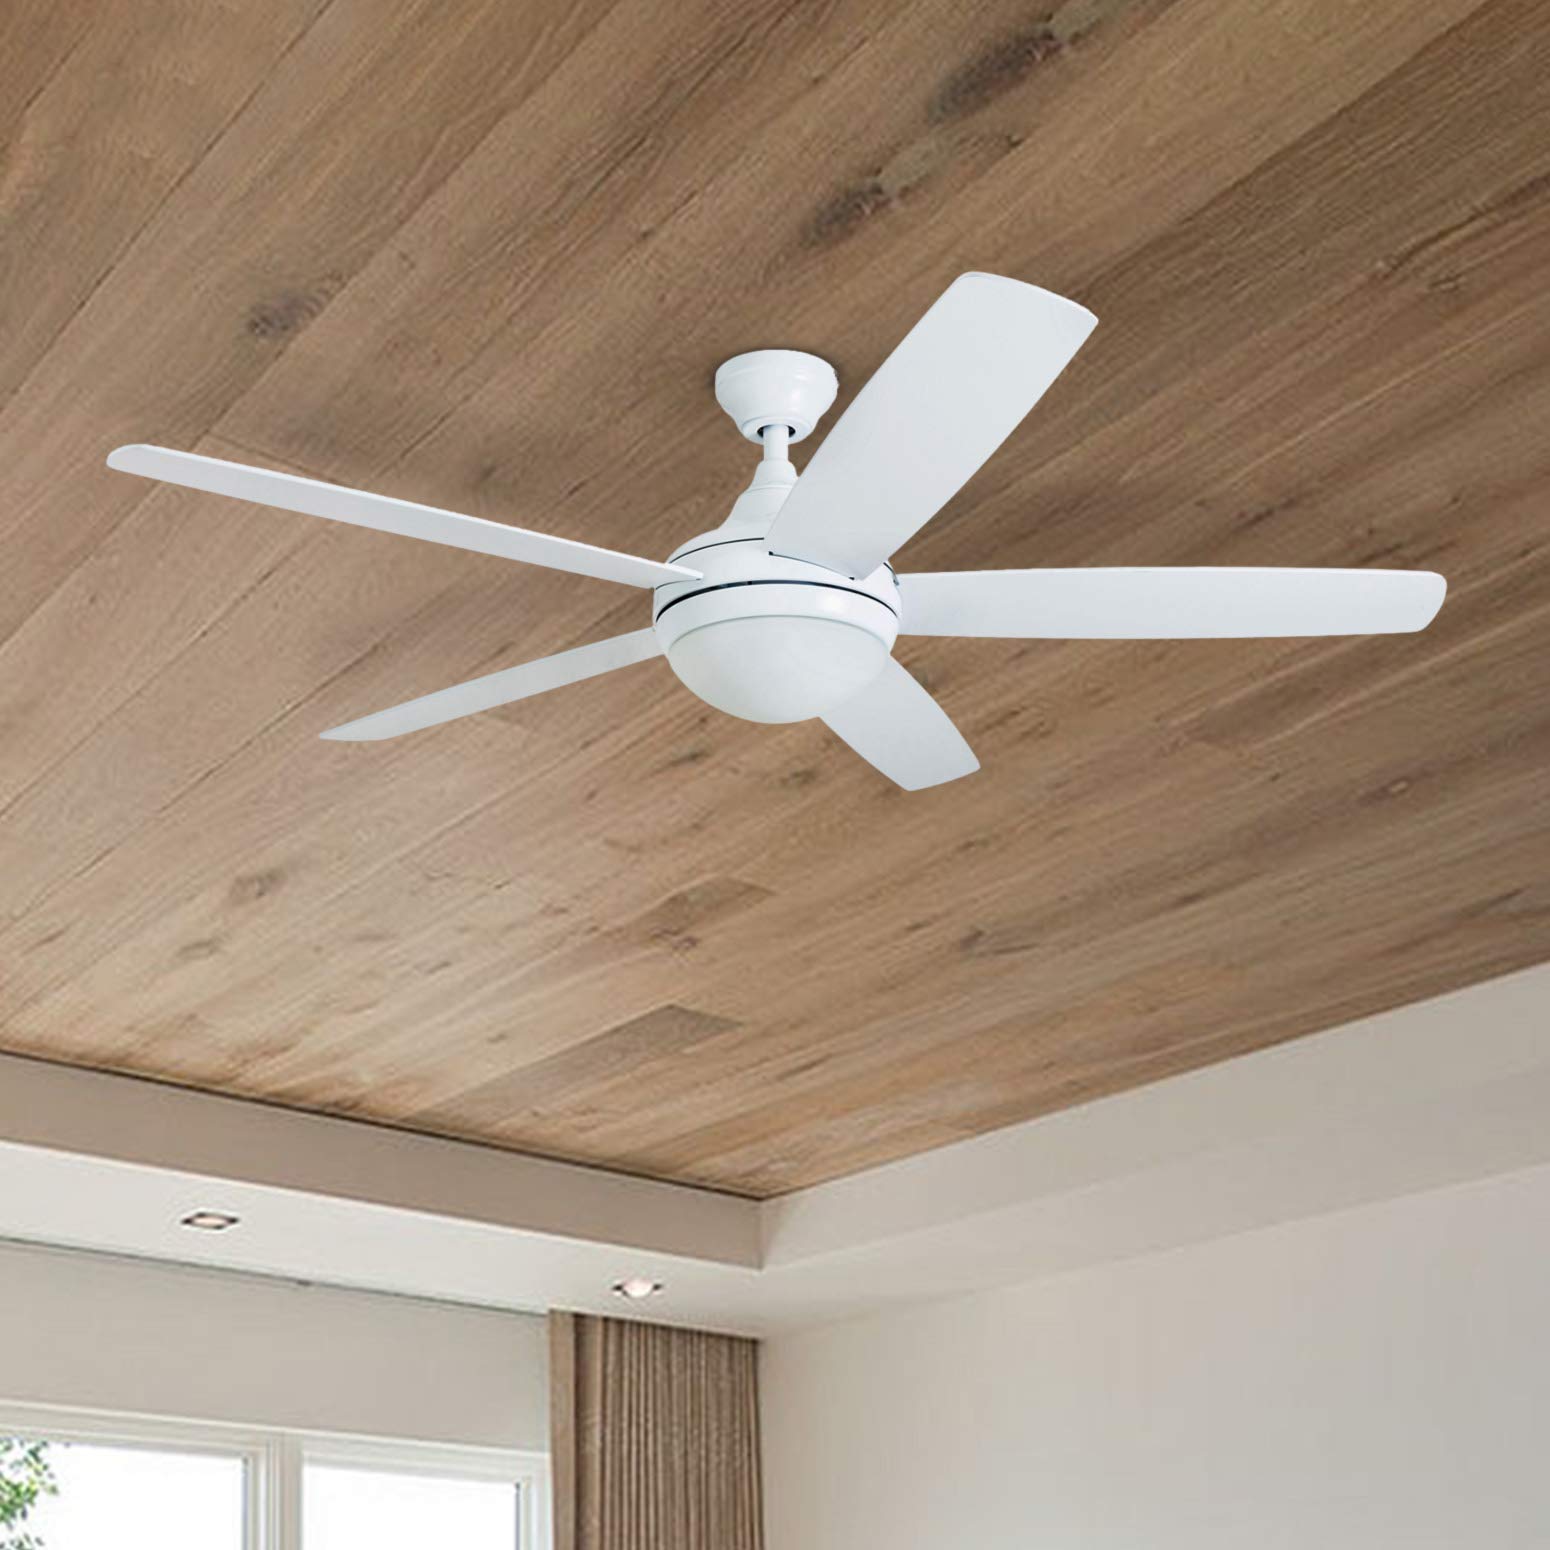 Prominence Home 80094-01 Ashby Ceiling Fan with Remote Control and Dimmable Integrated LED Light Frosted Fixture, 52